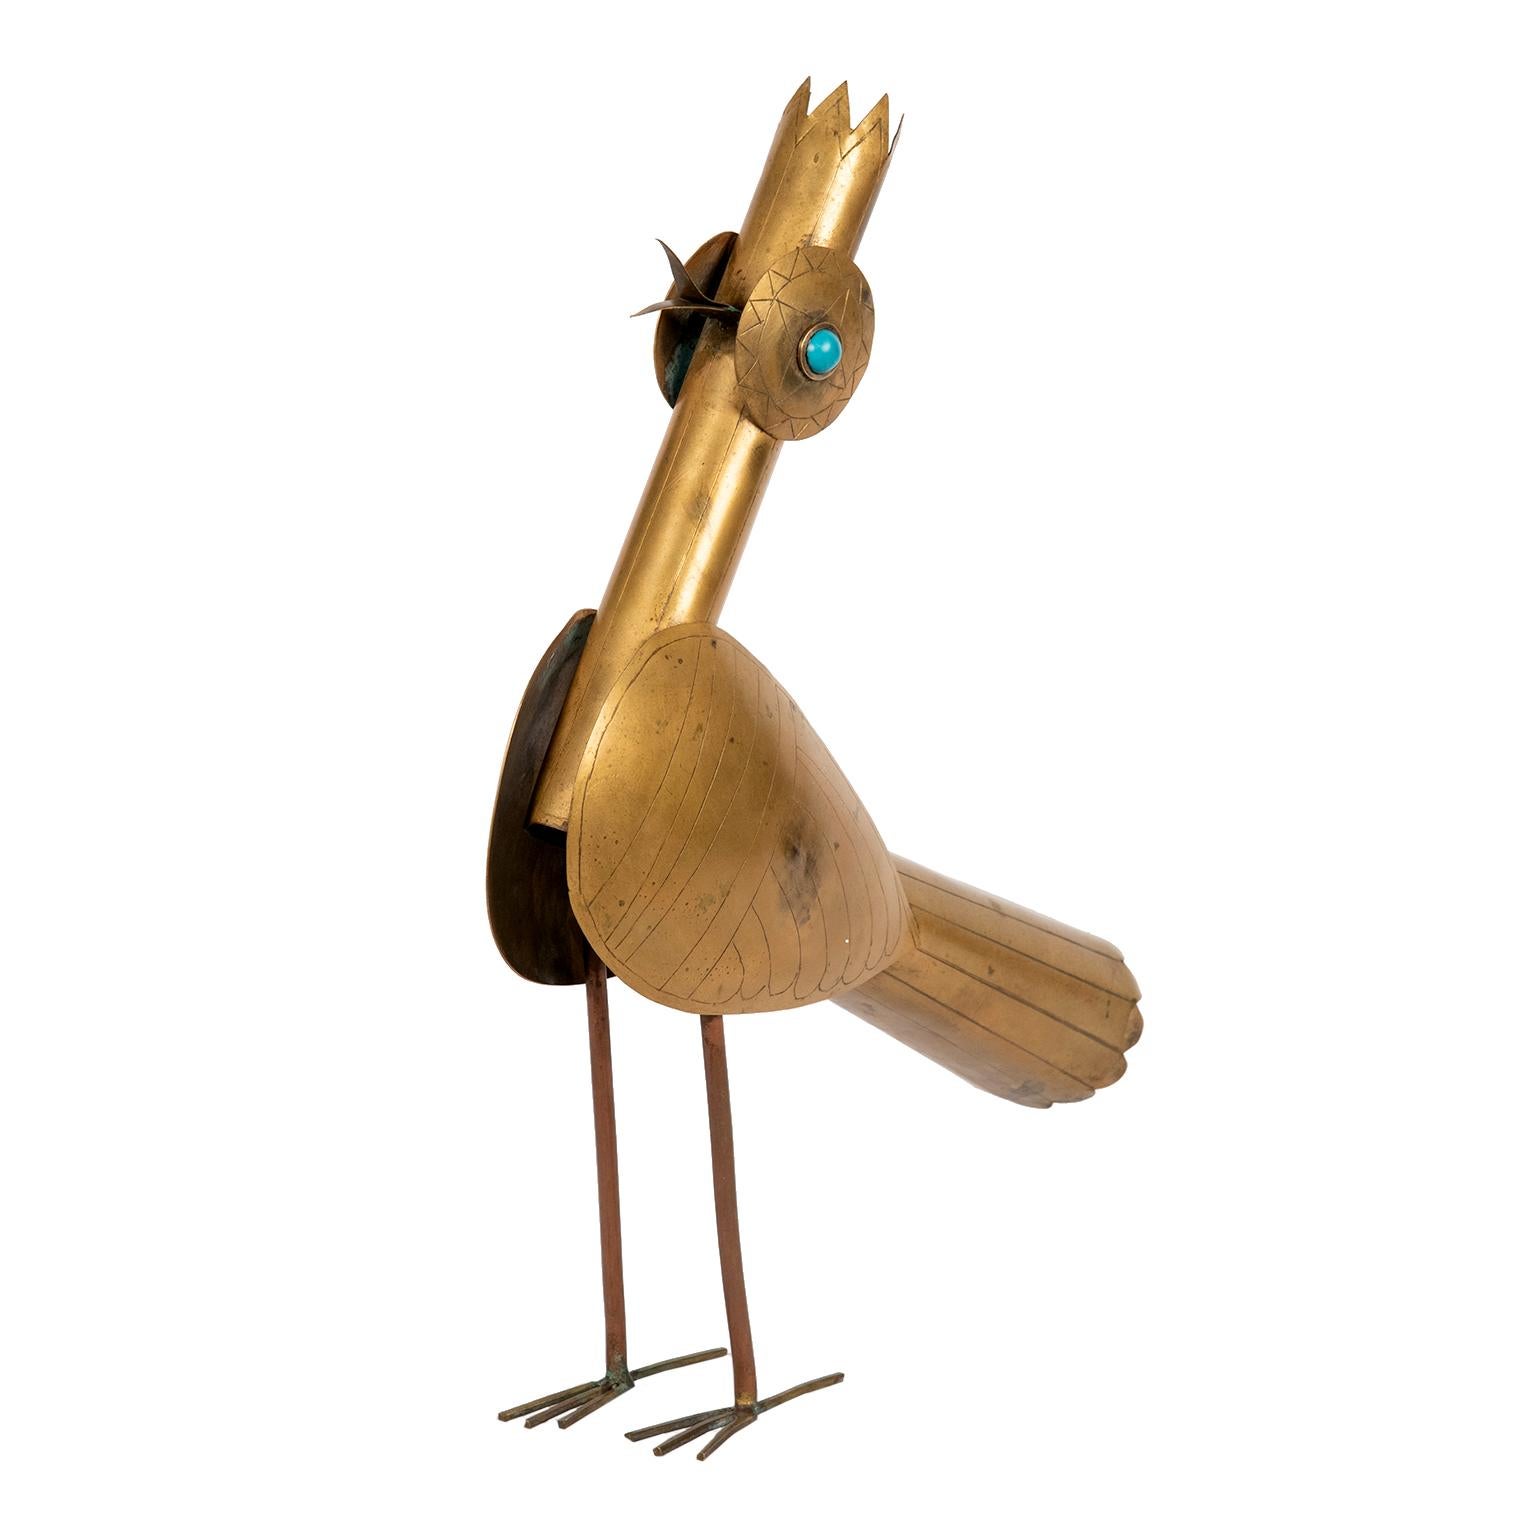 This charming warm golden brass metal sculpture with turquoise stone eyes is by celebrated painter and sculptor Ecuadorian Oswaldo Guayasamín (1919-1999). 
Signed Guayasamin on the side of the birds tale.